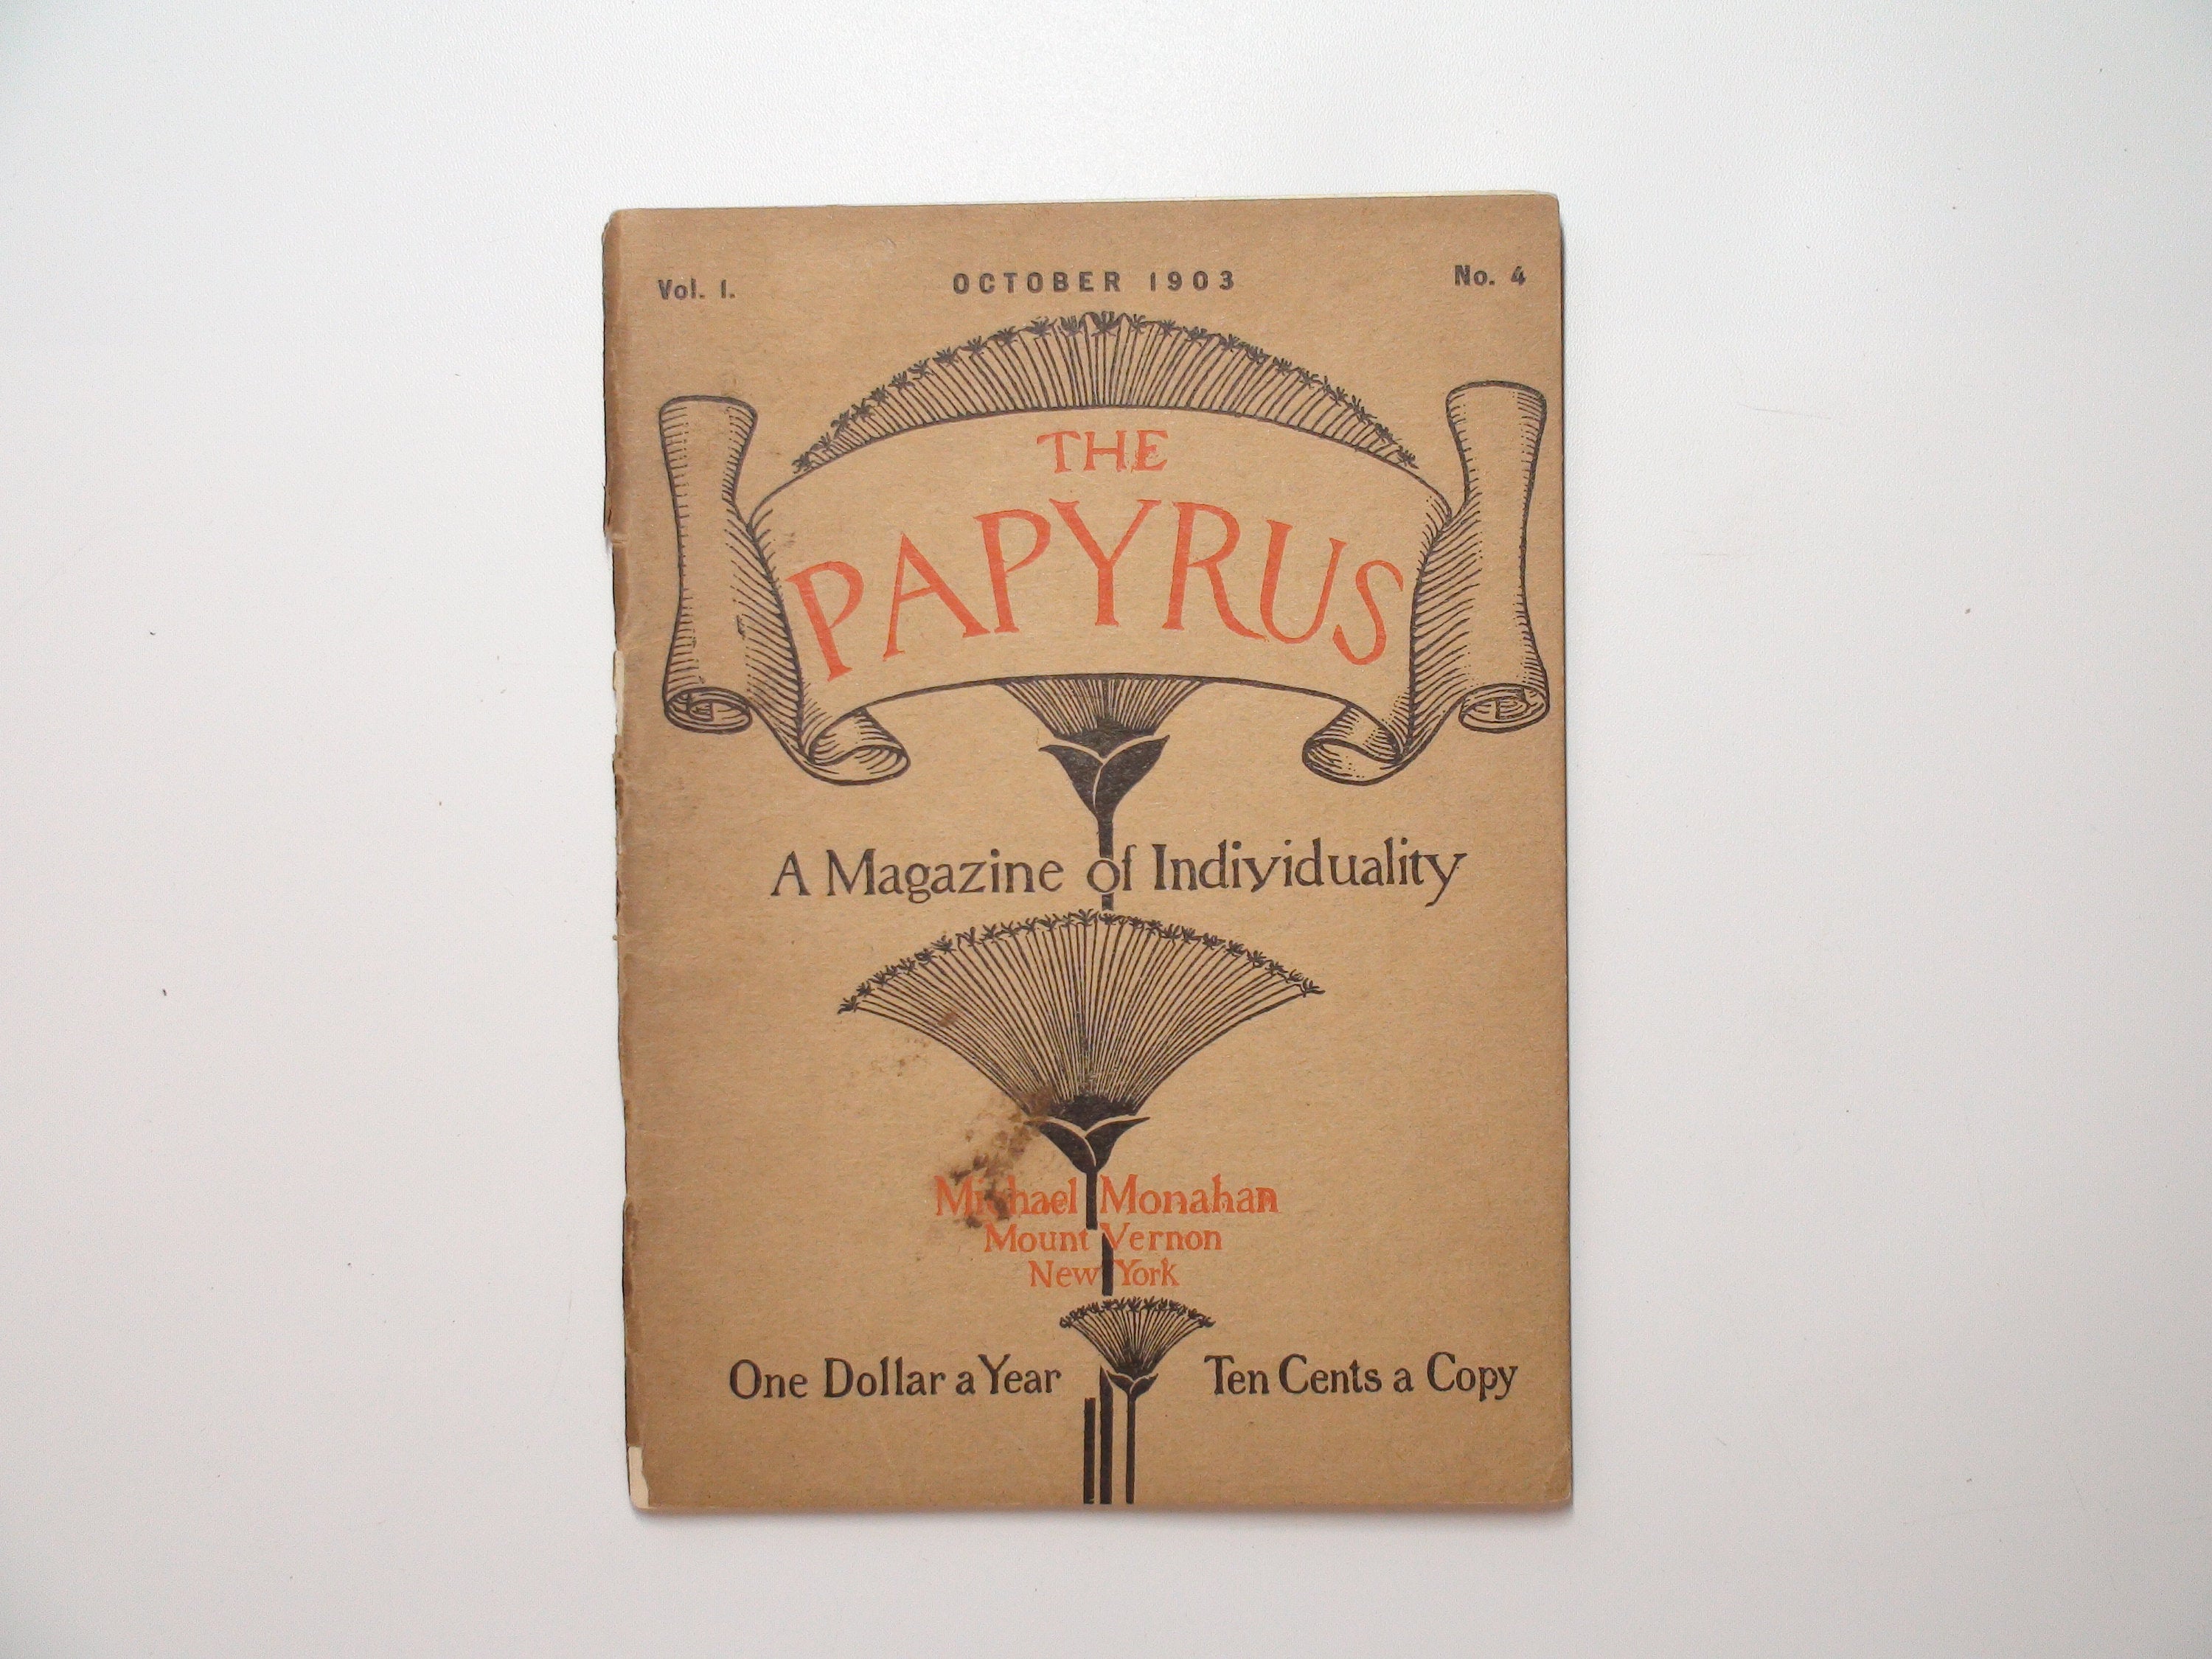 The Papyrus Magazine, Ed. by Michael Monahan, RARE, 1st Ed, October 1903